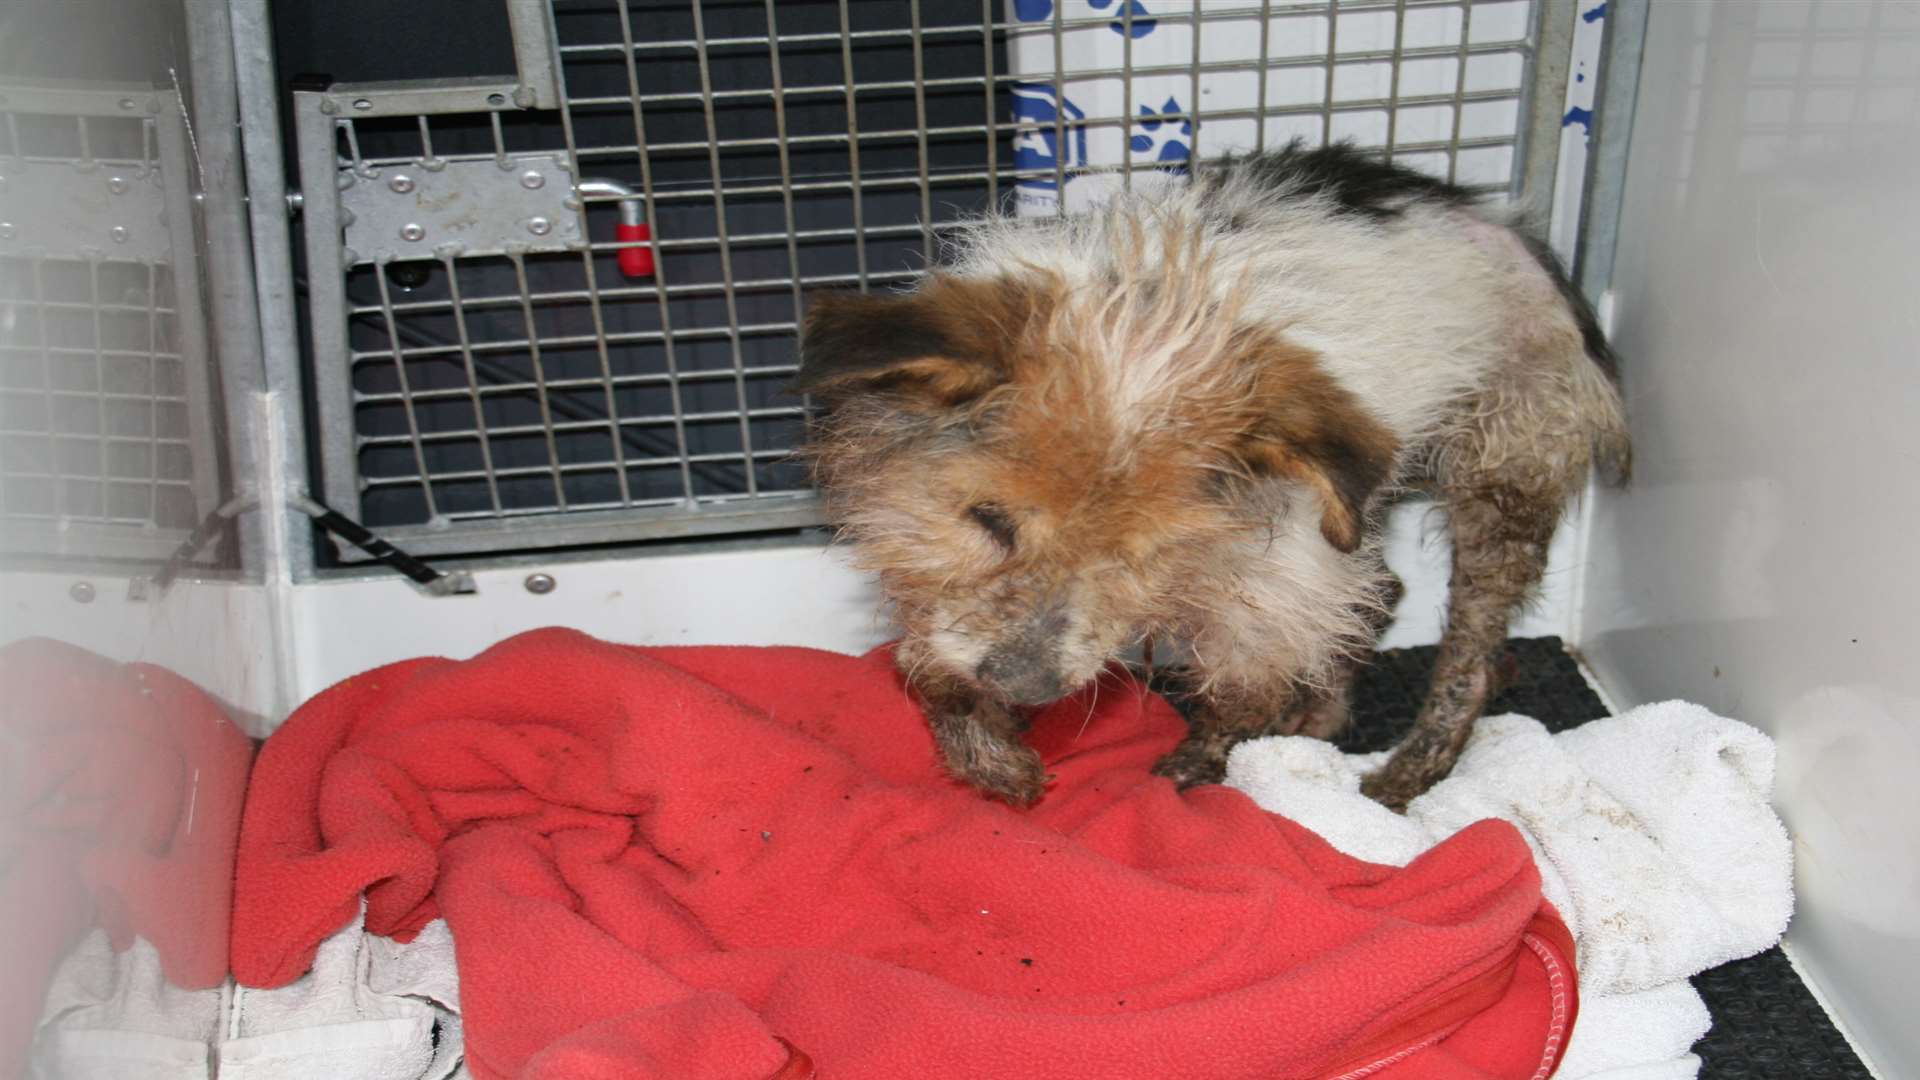 Frances after being rescued. Photo: RSPCA